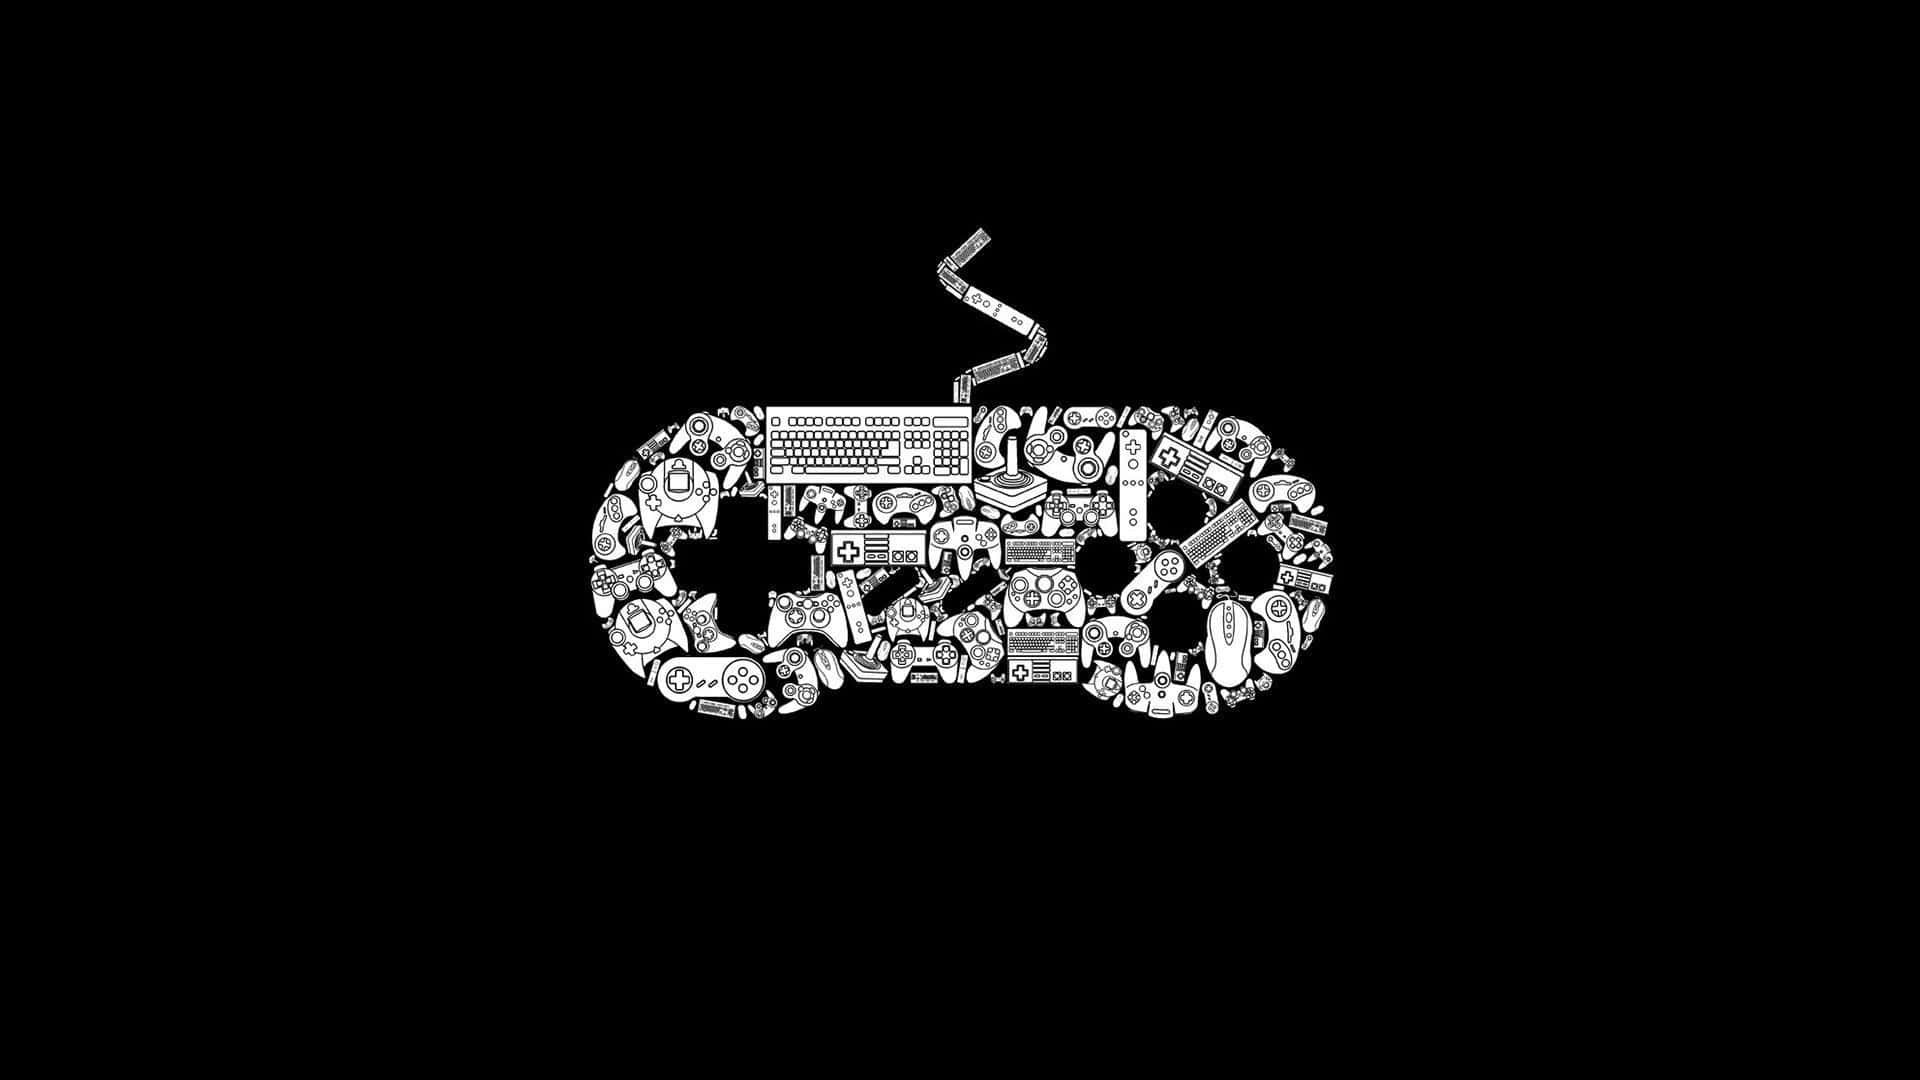 A Black And White Game Controller On A Black Background